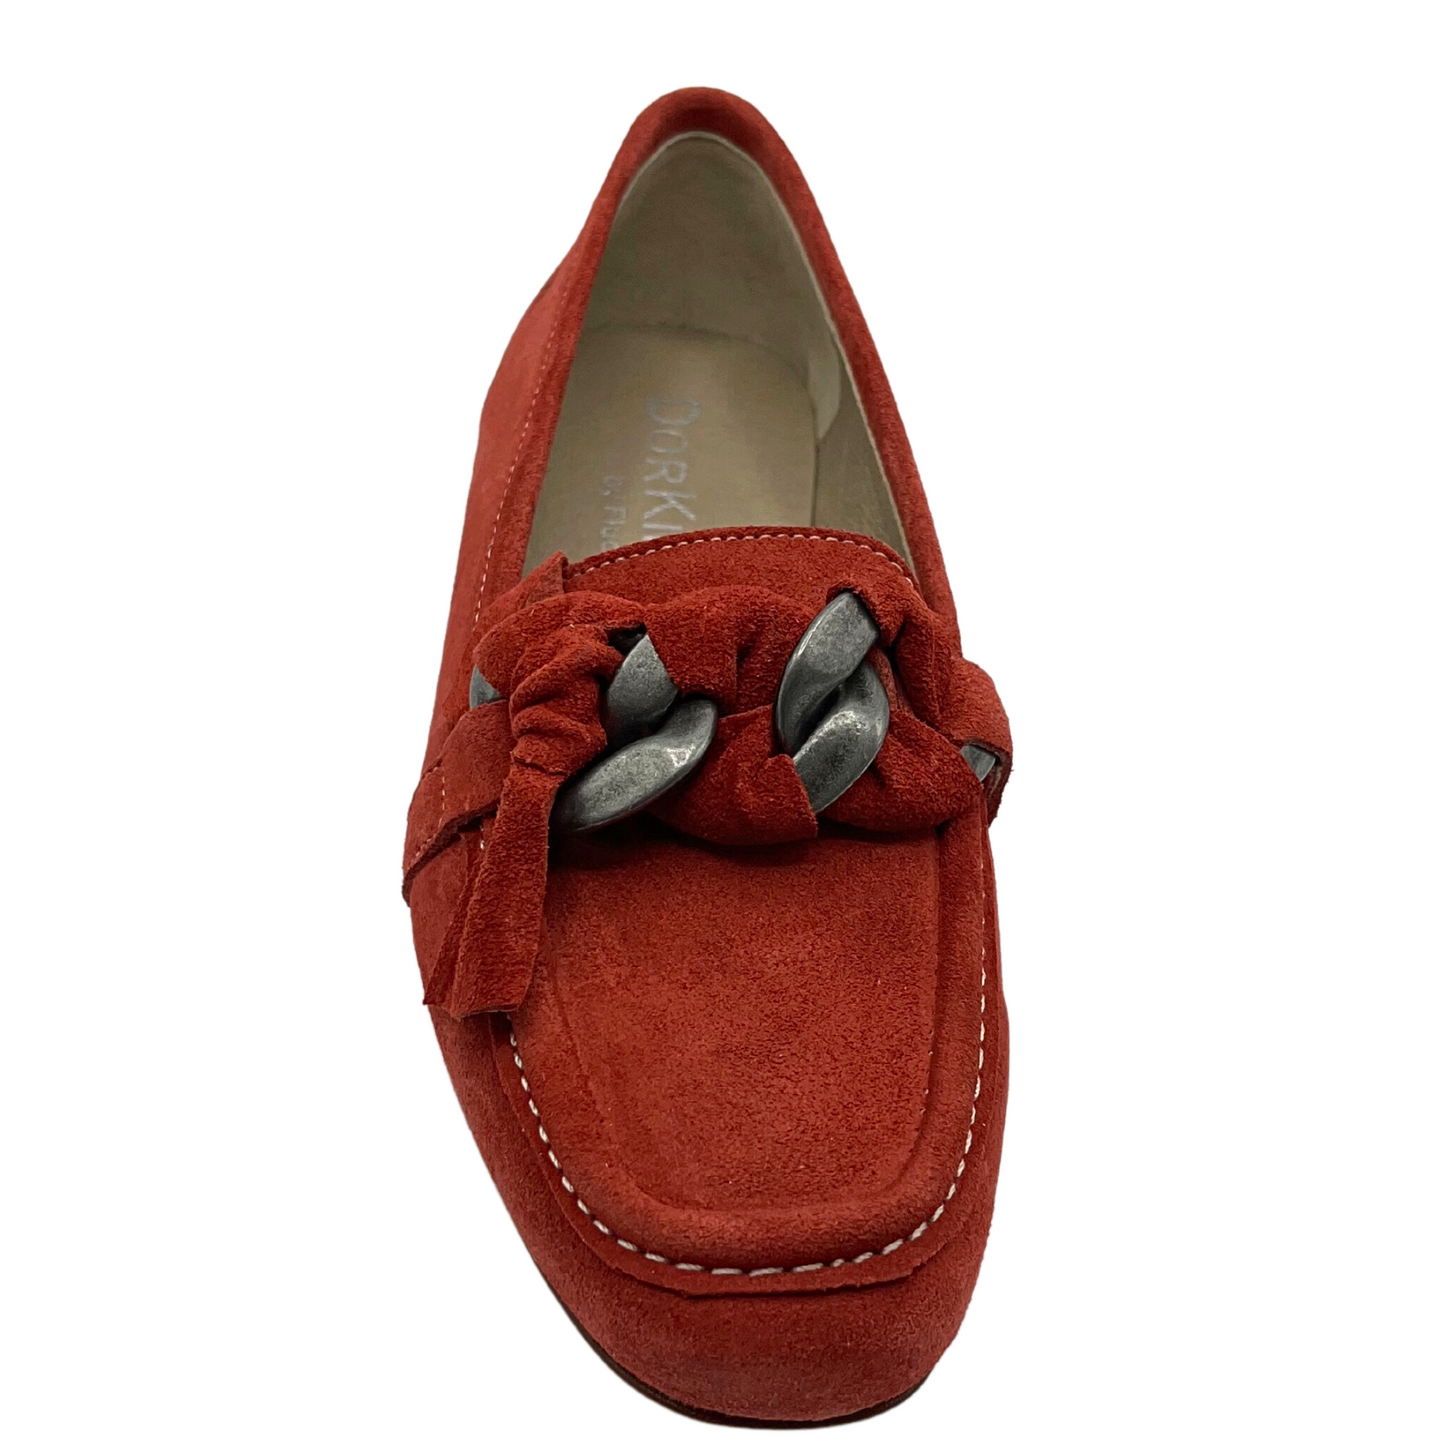 Top down view of terracotta suede slip on loafer.  Unique knotted leather around a metallic chain at top of foot